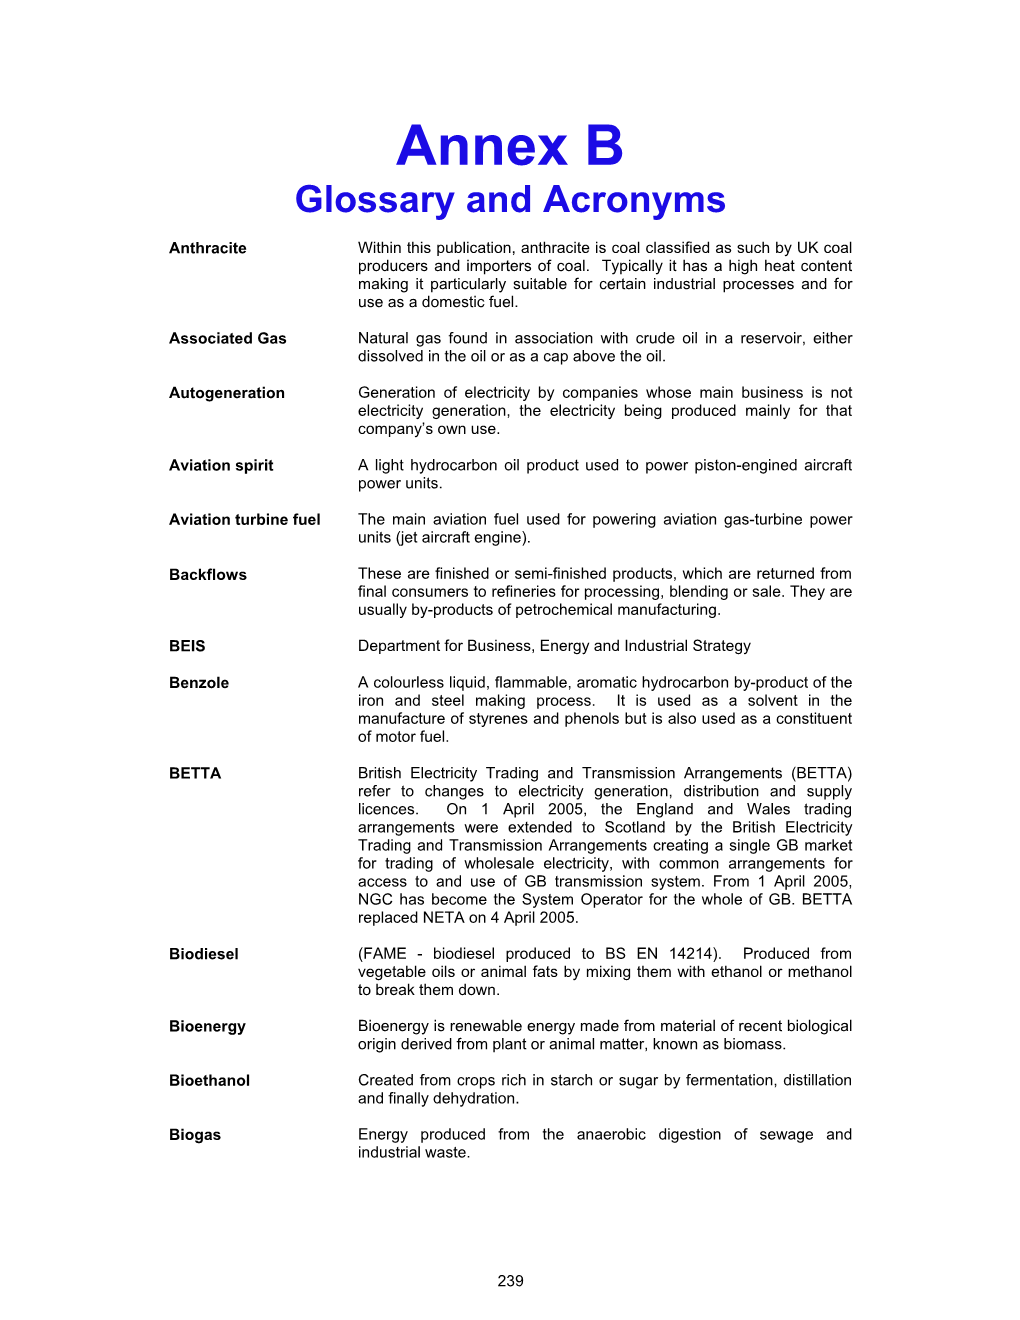 Annex B Glossary and Acronyms